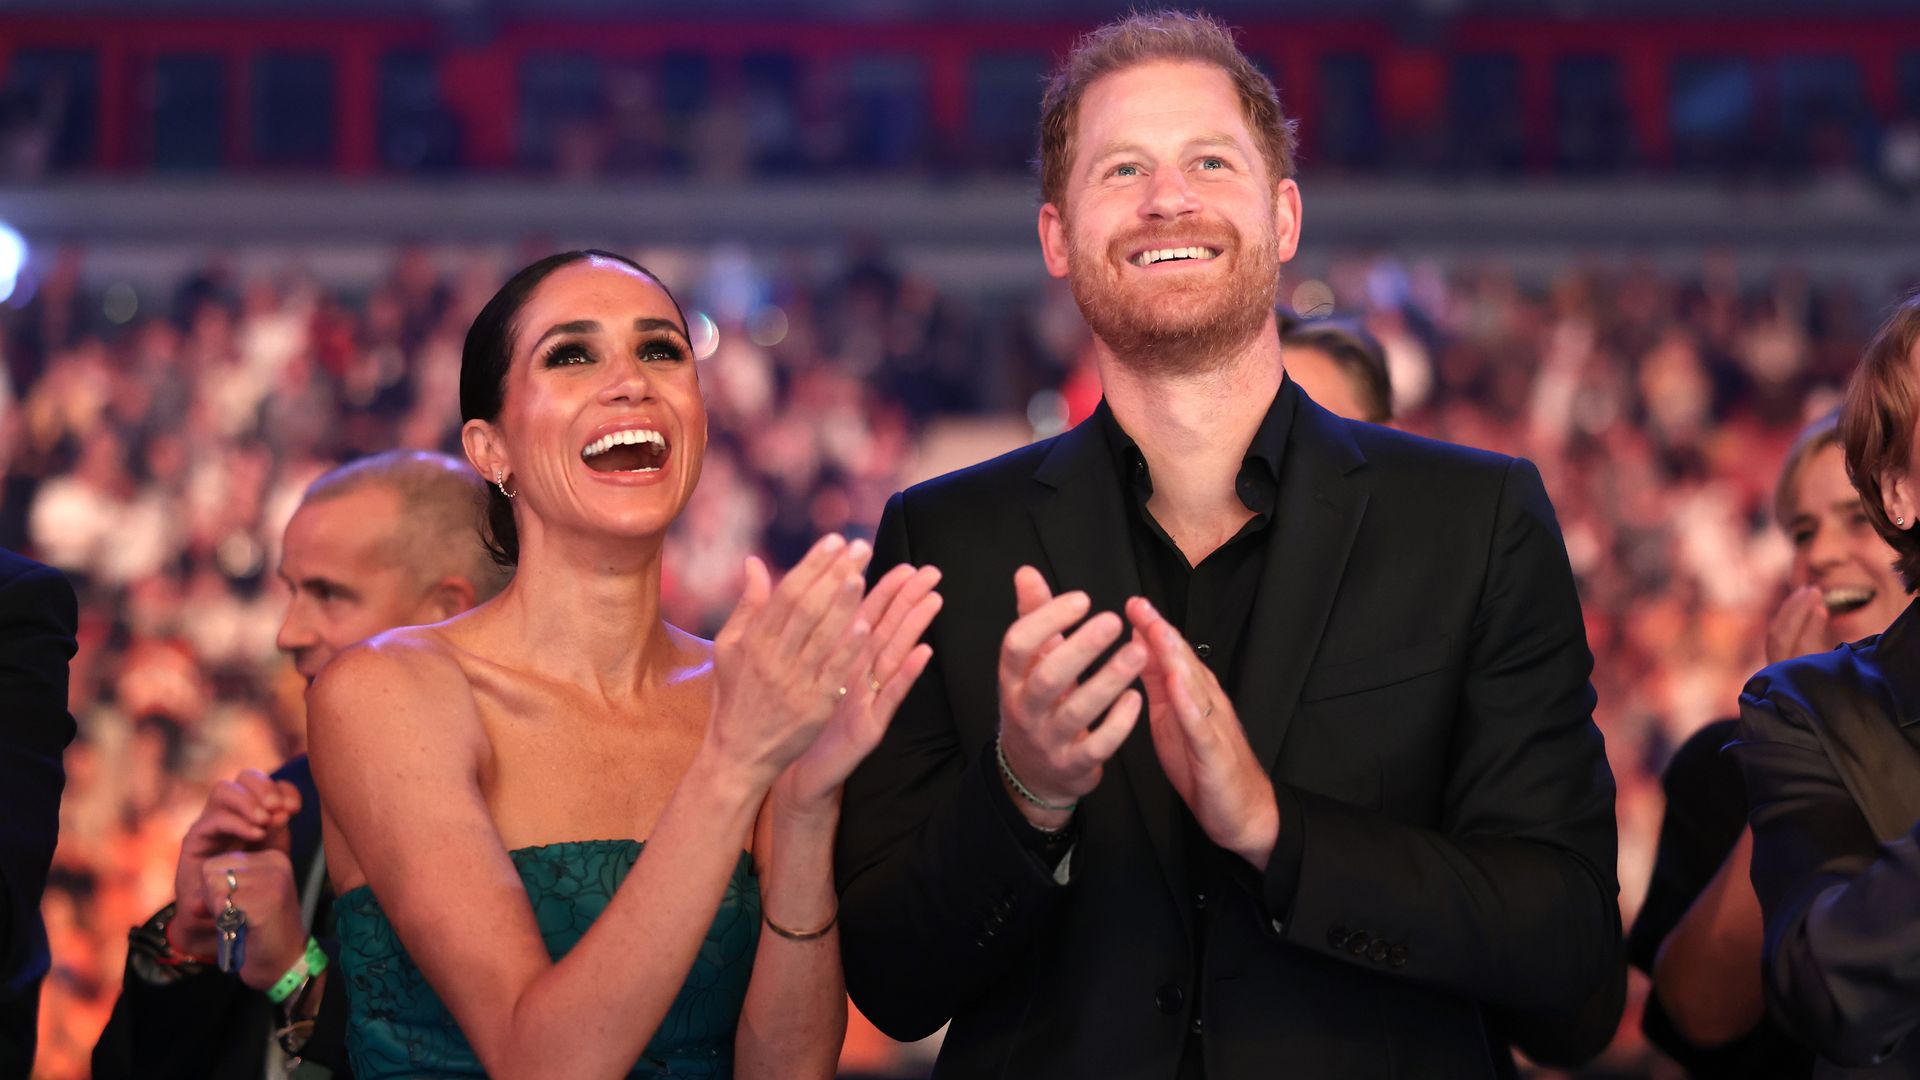 Meghan Markle and Prince Harry clapping whilst looking at the stage